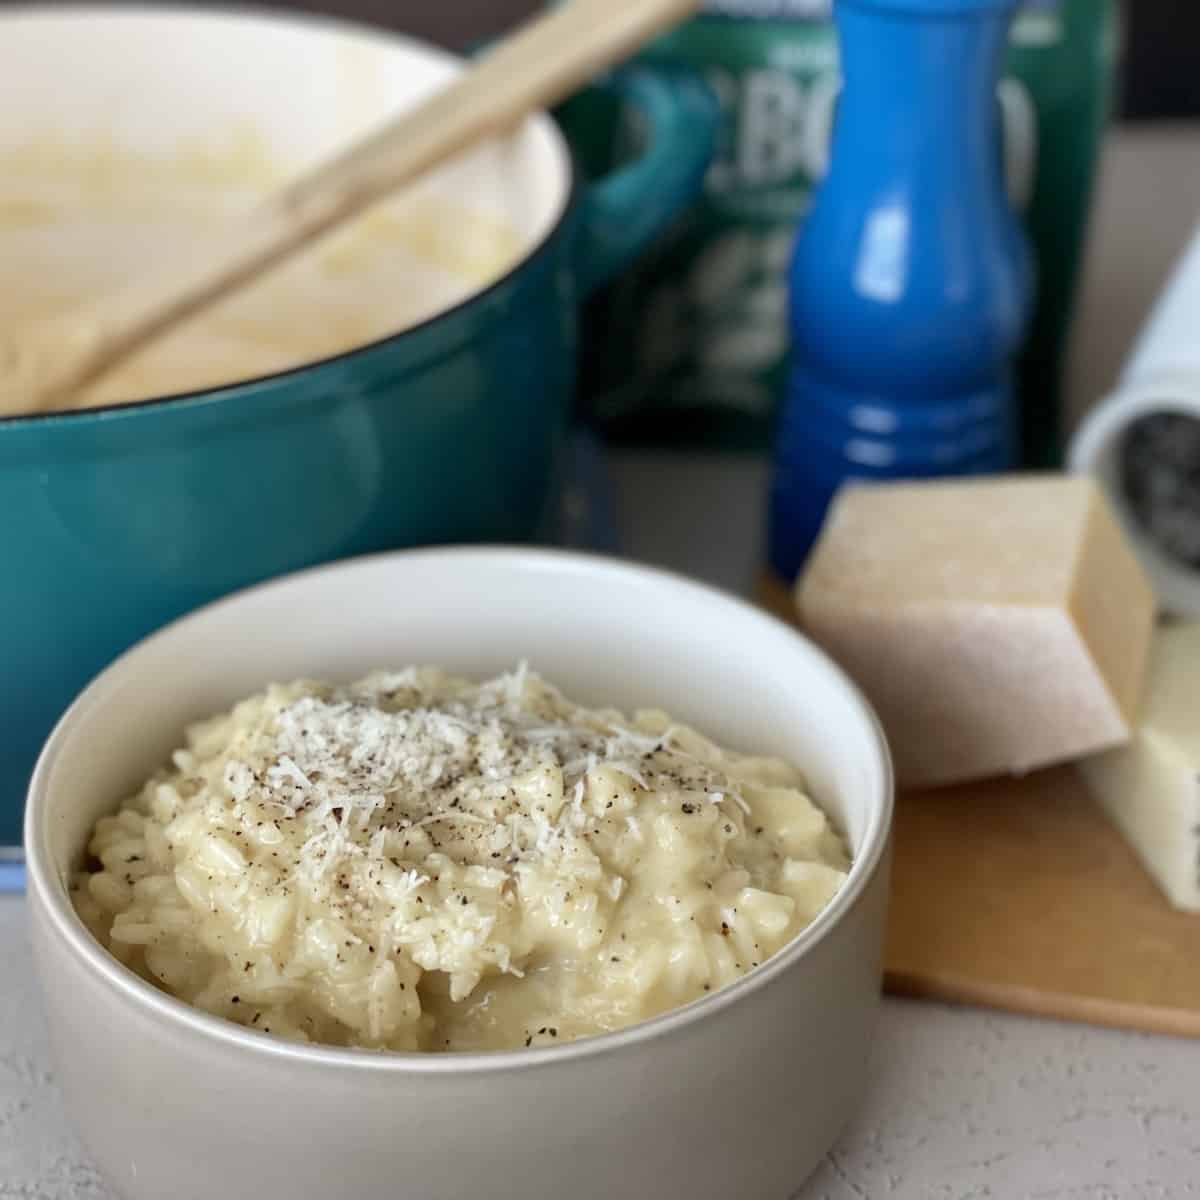 cacio e pepe risotto served in a tan bowl topped with fresh cracked black pepper and extra pecorino roam cheese with blocks of cheese a teal pot and blue pepper grinder in the background